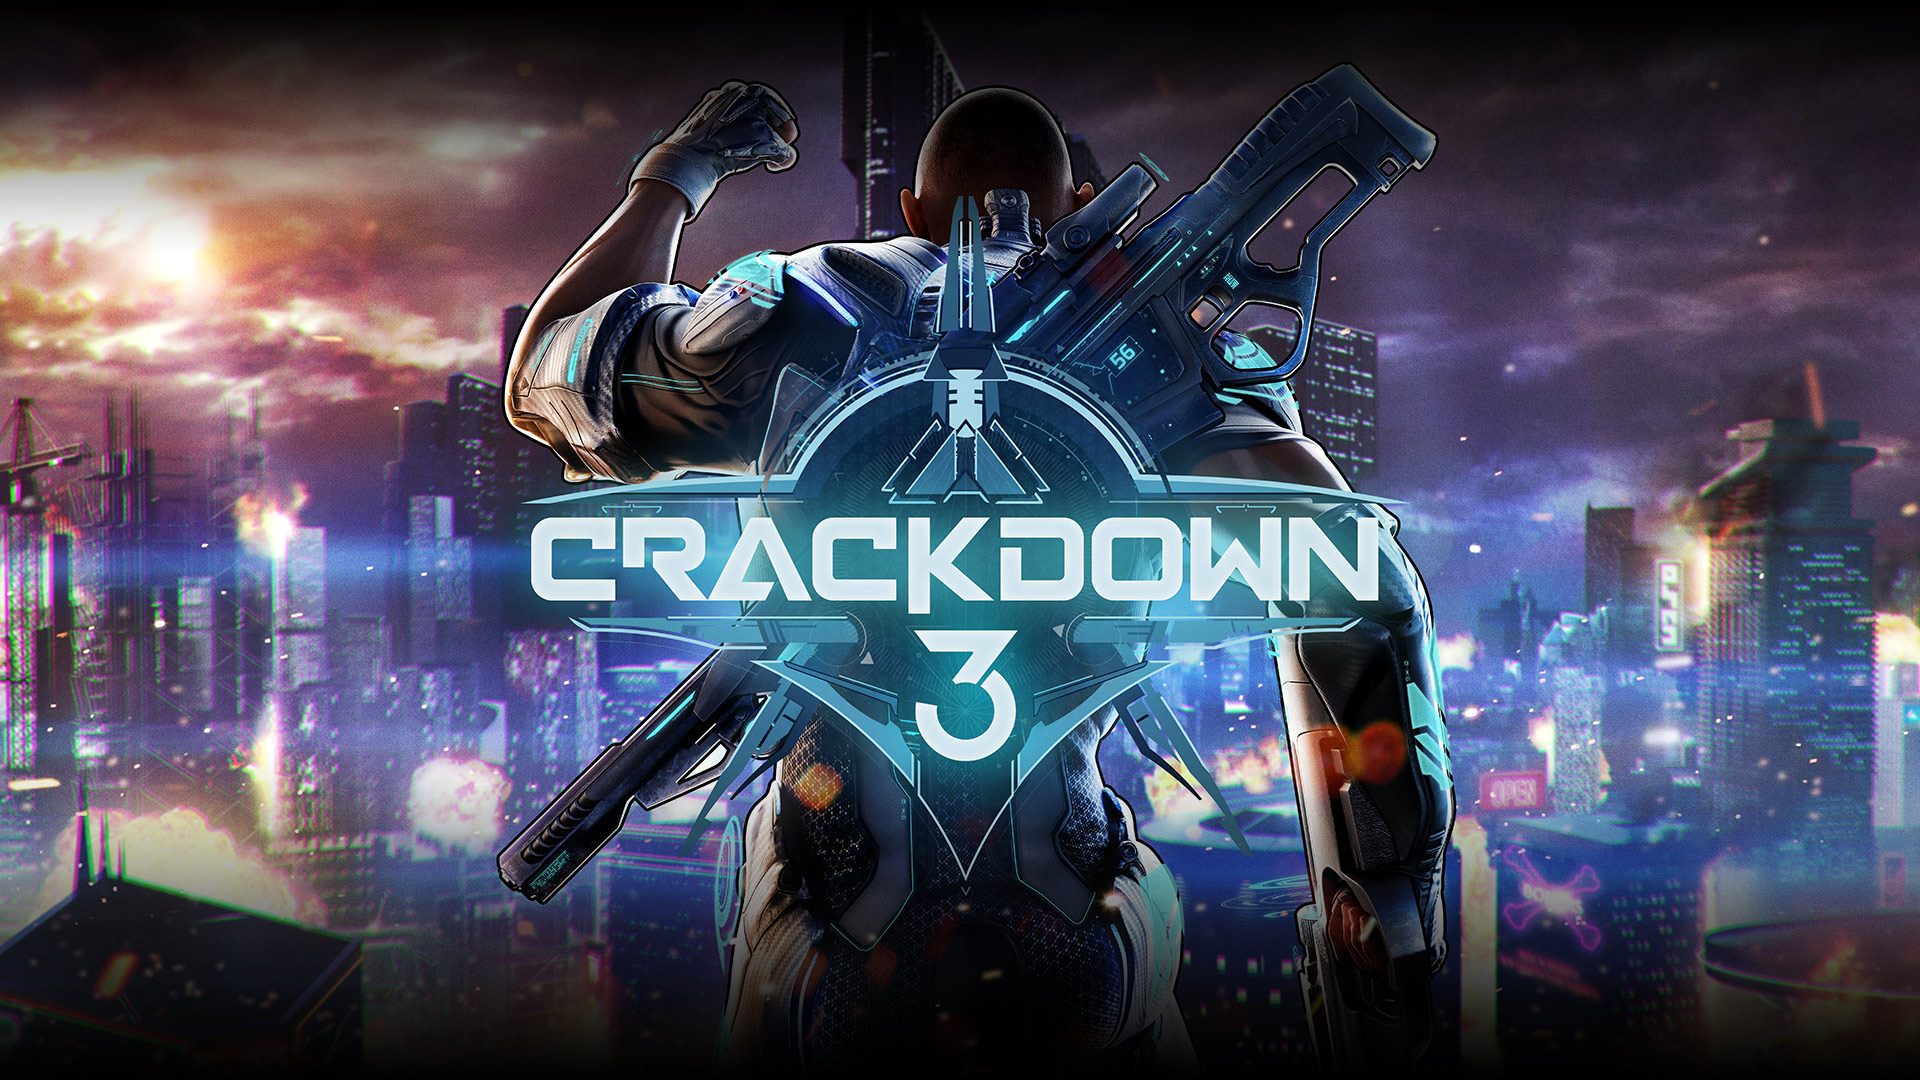 download crackdown 2 game pass for free